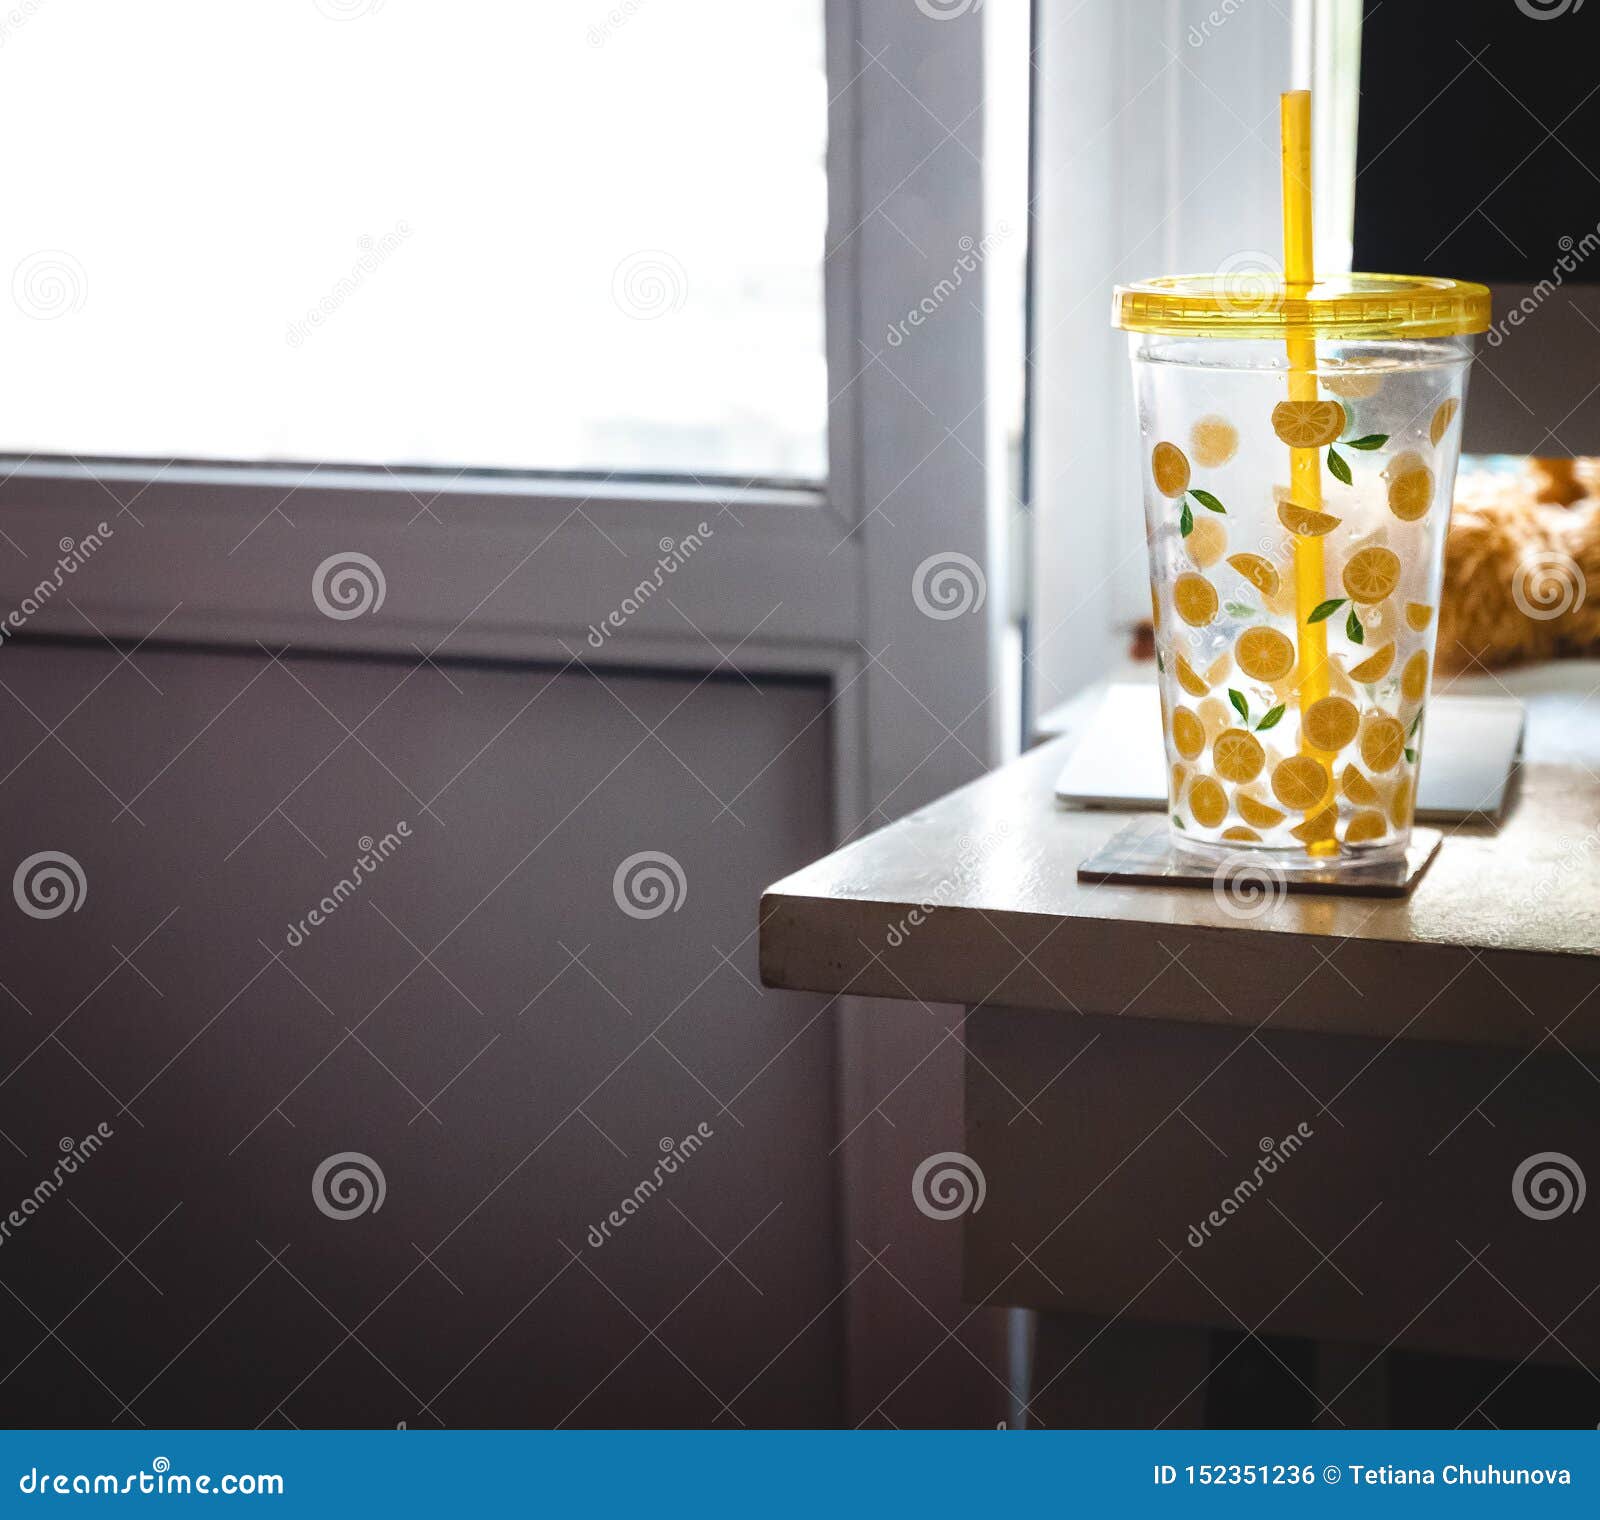 A Glass With A Straw With Painted Lemons On The Desk Of The Home